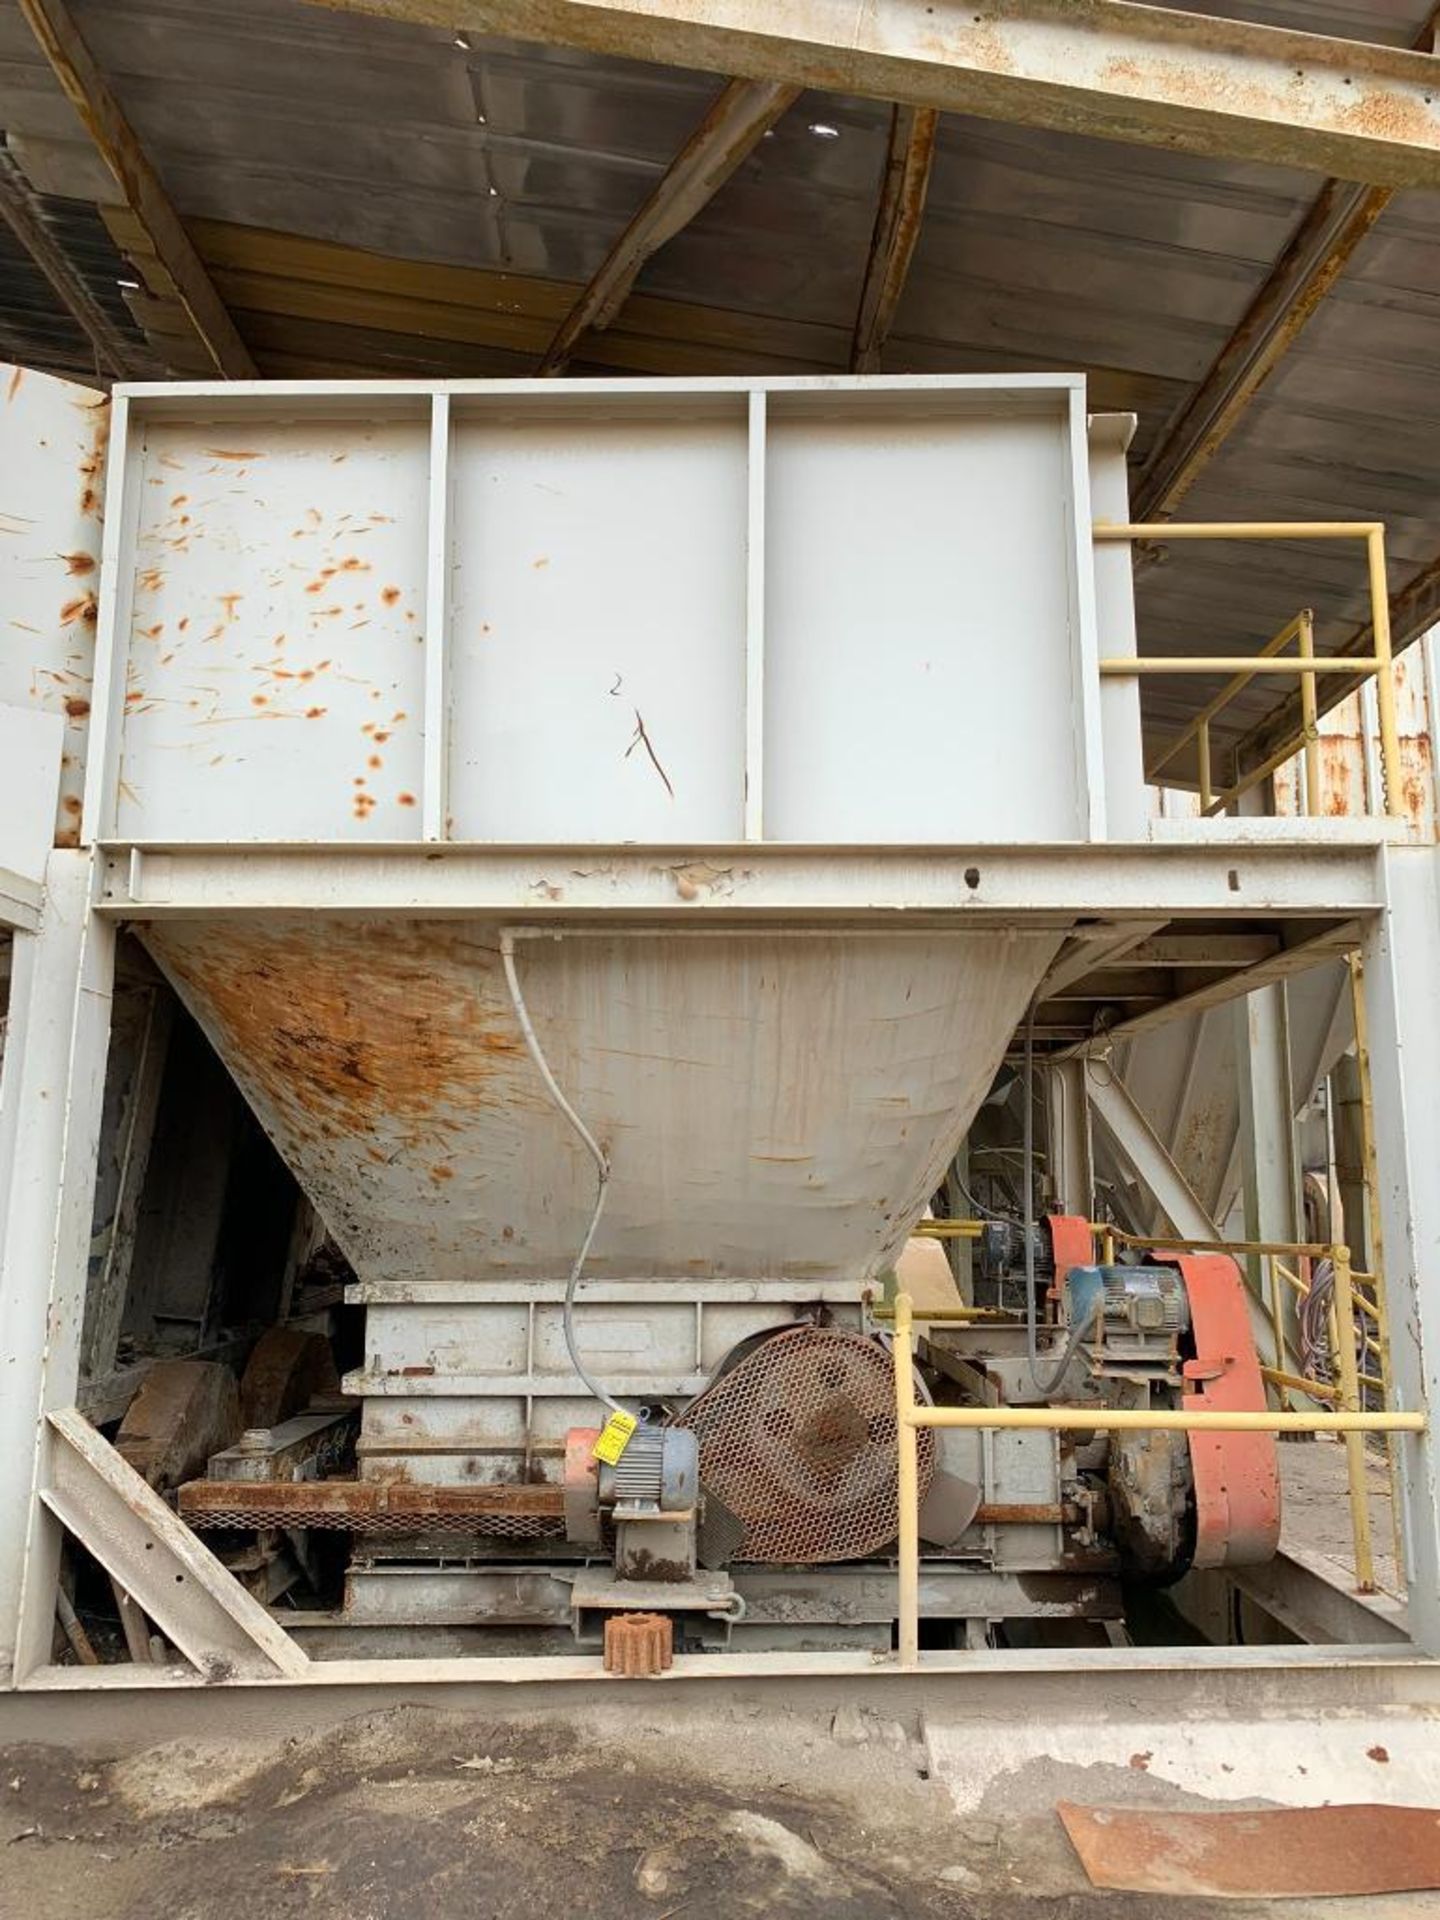 Aggregate Crusher - Image 5 of 6